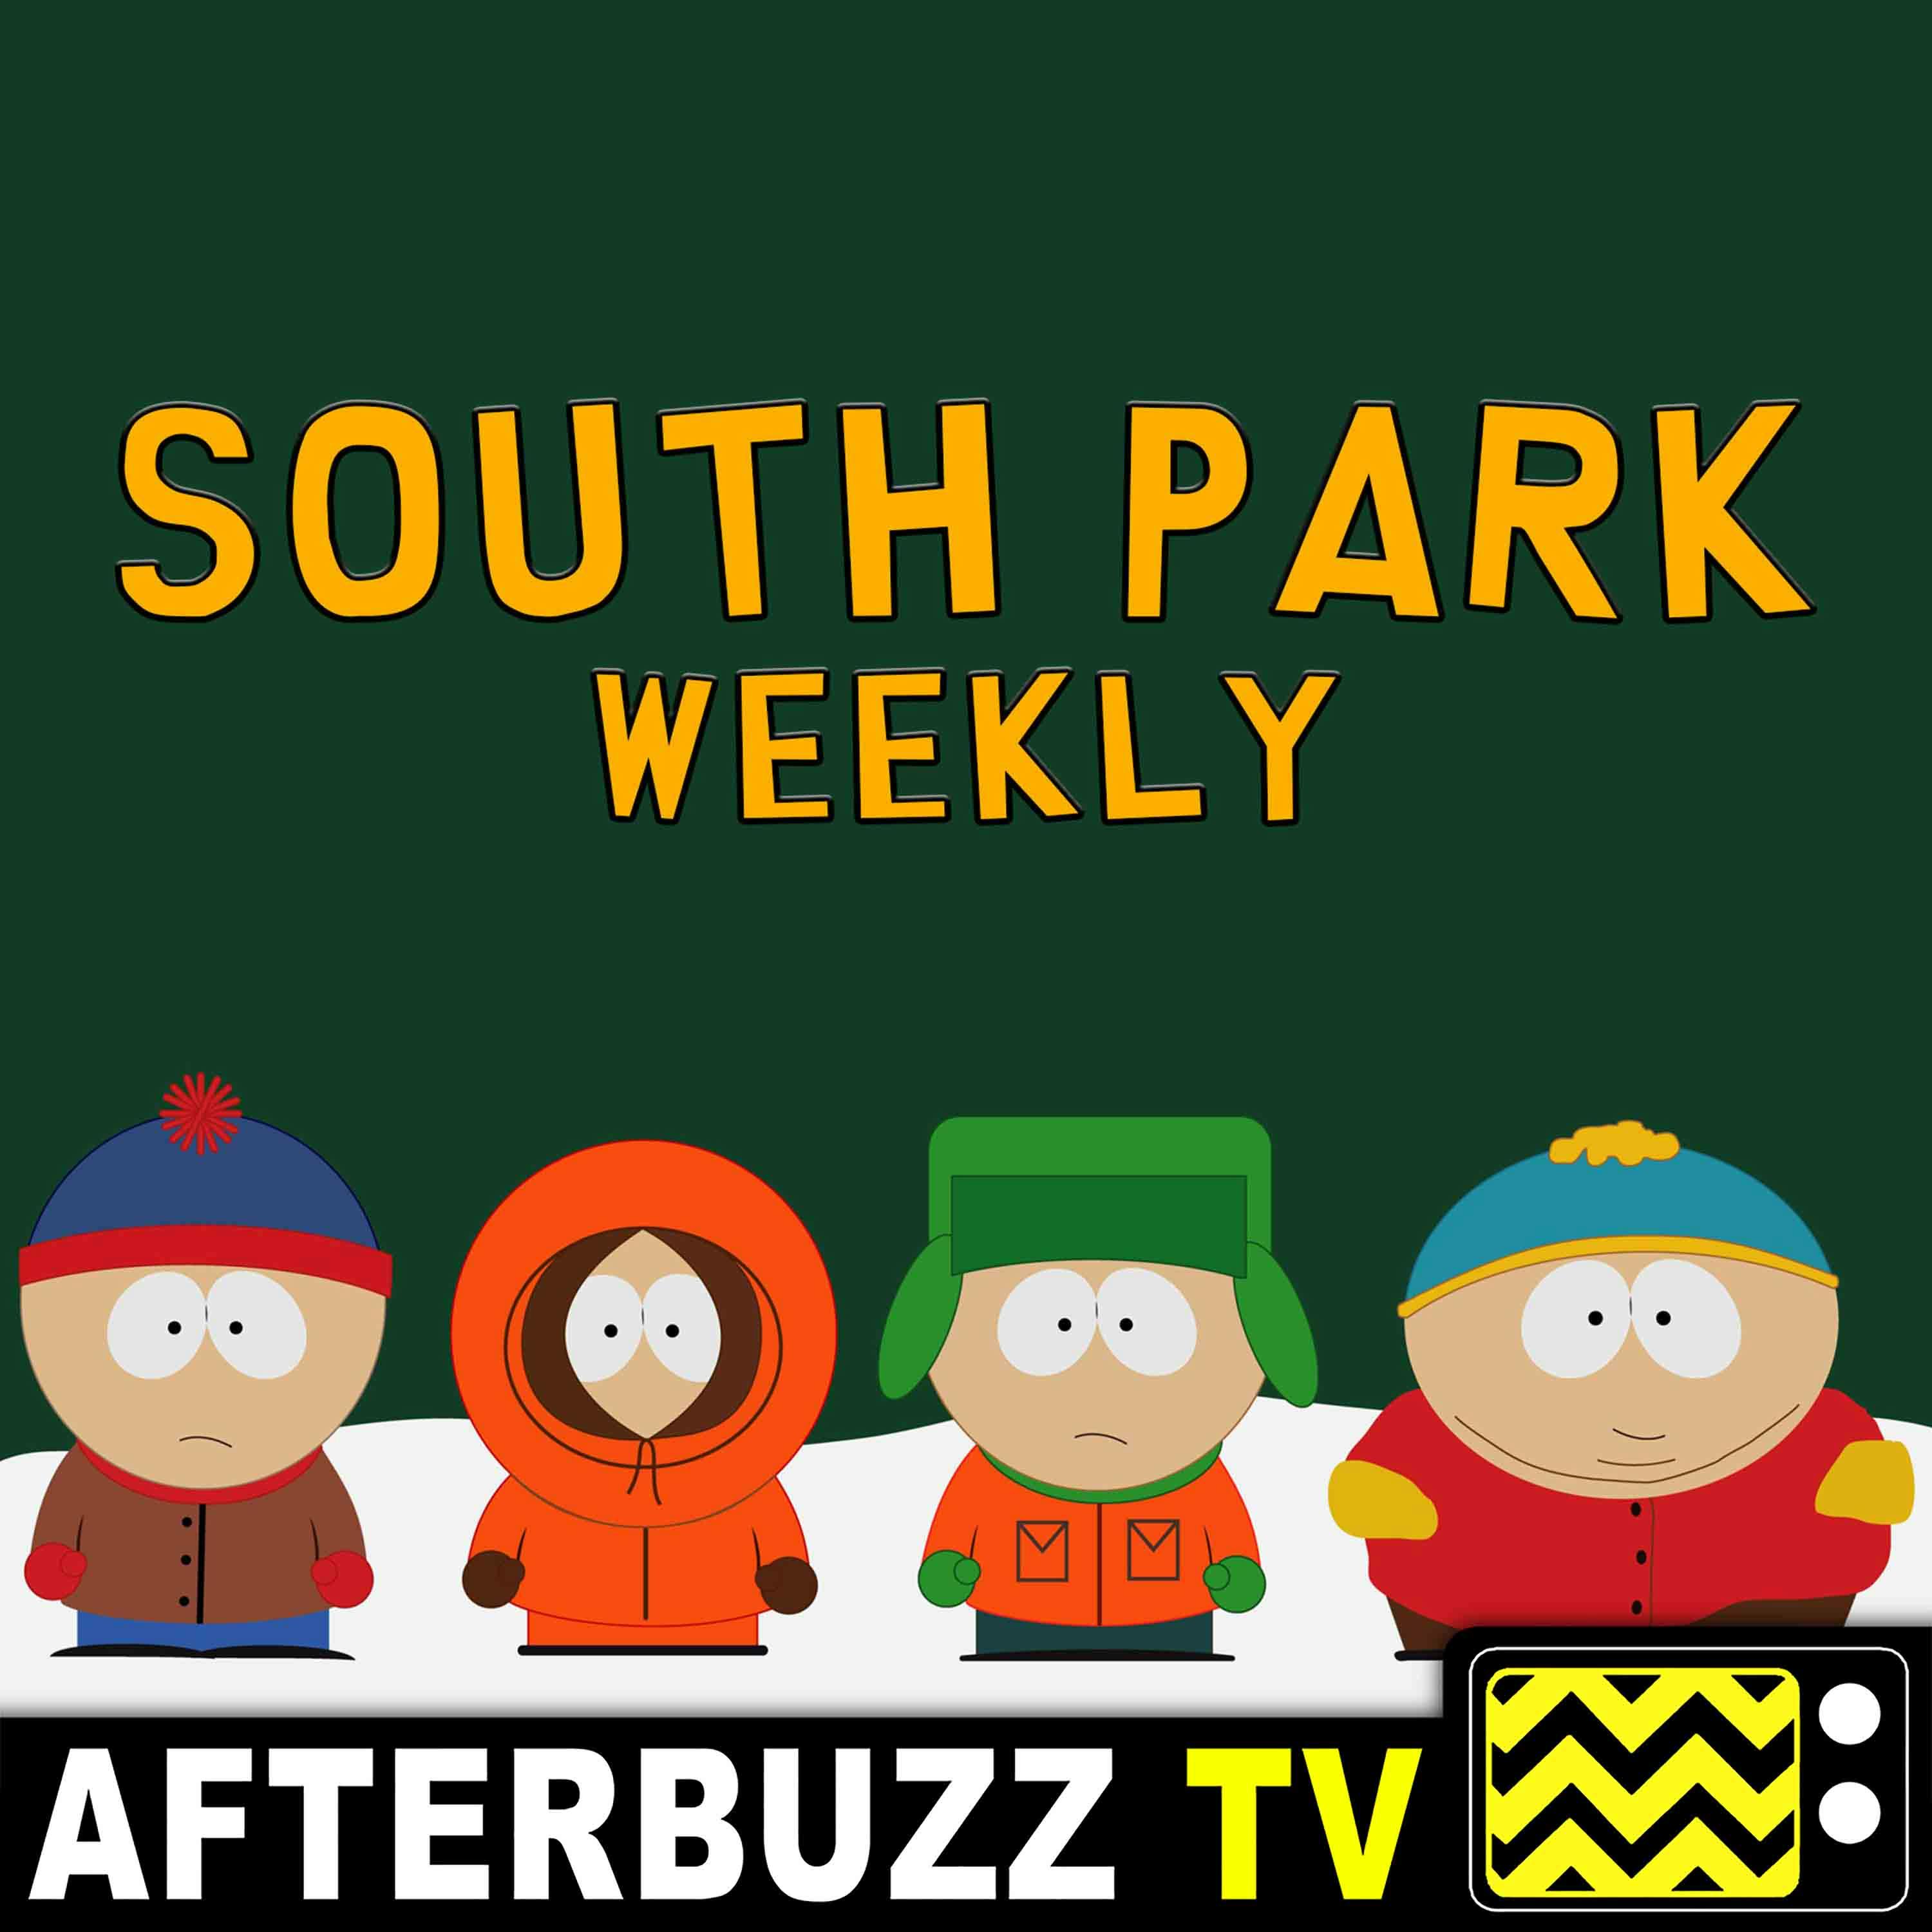 Top South Park Episodes Featuring Randy Marsh Debate | South Park Weekly